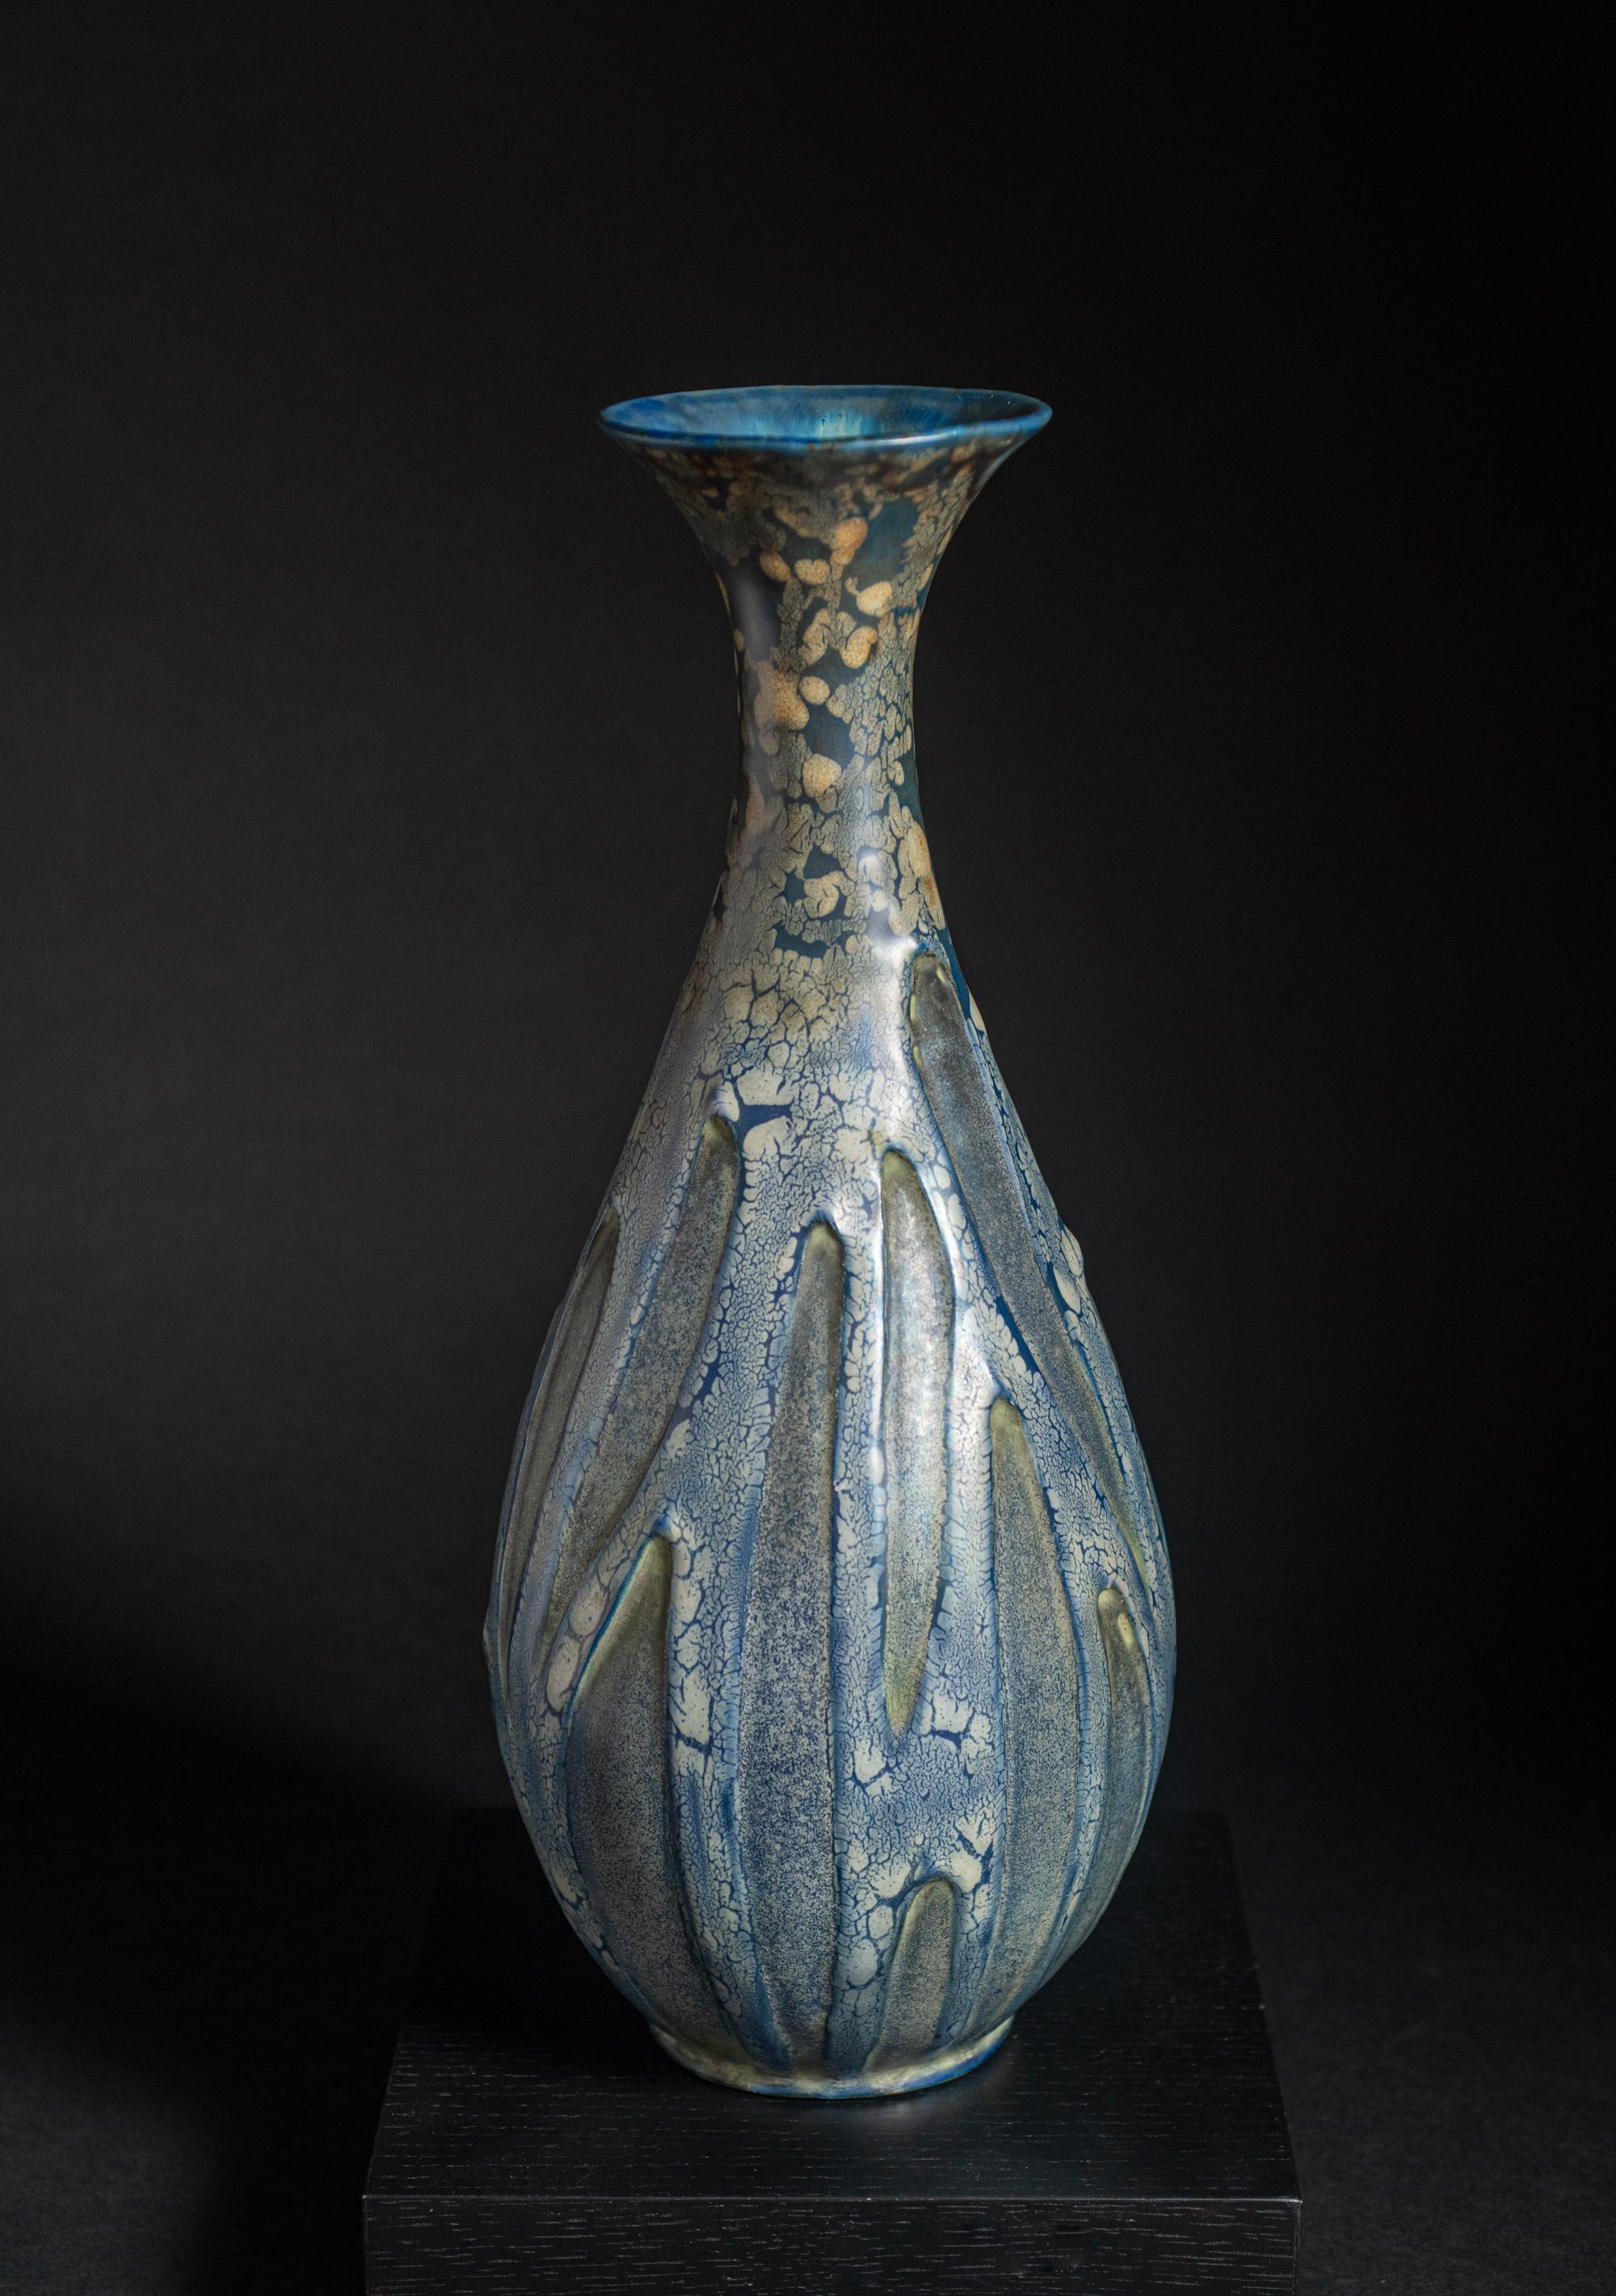 Model #464. Similar example shown at the World’s Columbian Exposition of 1893. Ref: The House of Amphora, Scott; Pg 62.

Riessner, Stellmacher and Kessel (RSt&K), consistently marked pieces with the tradename “Amphora” by the late 1890s and became